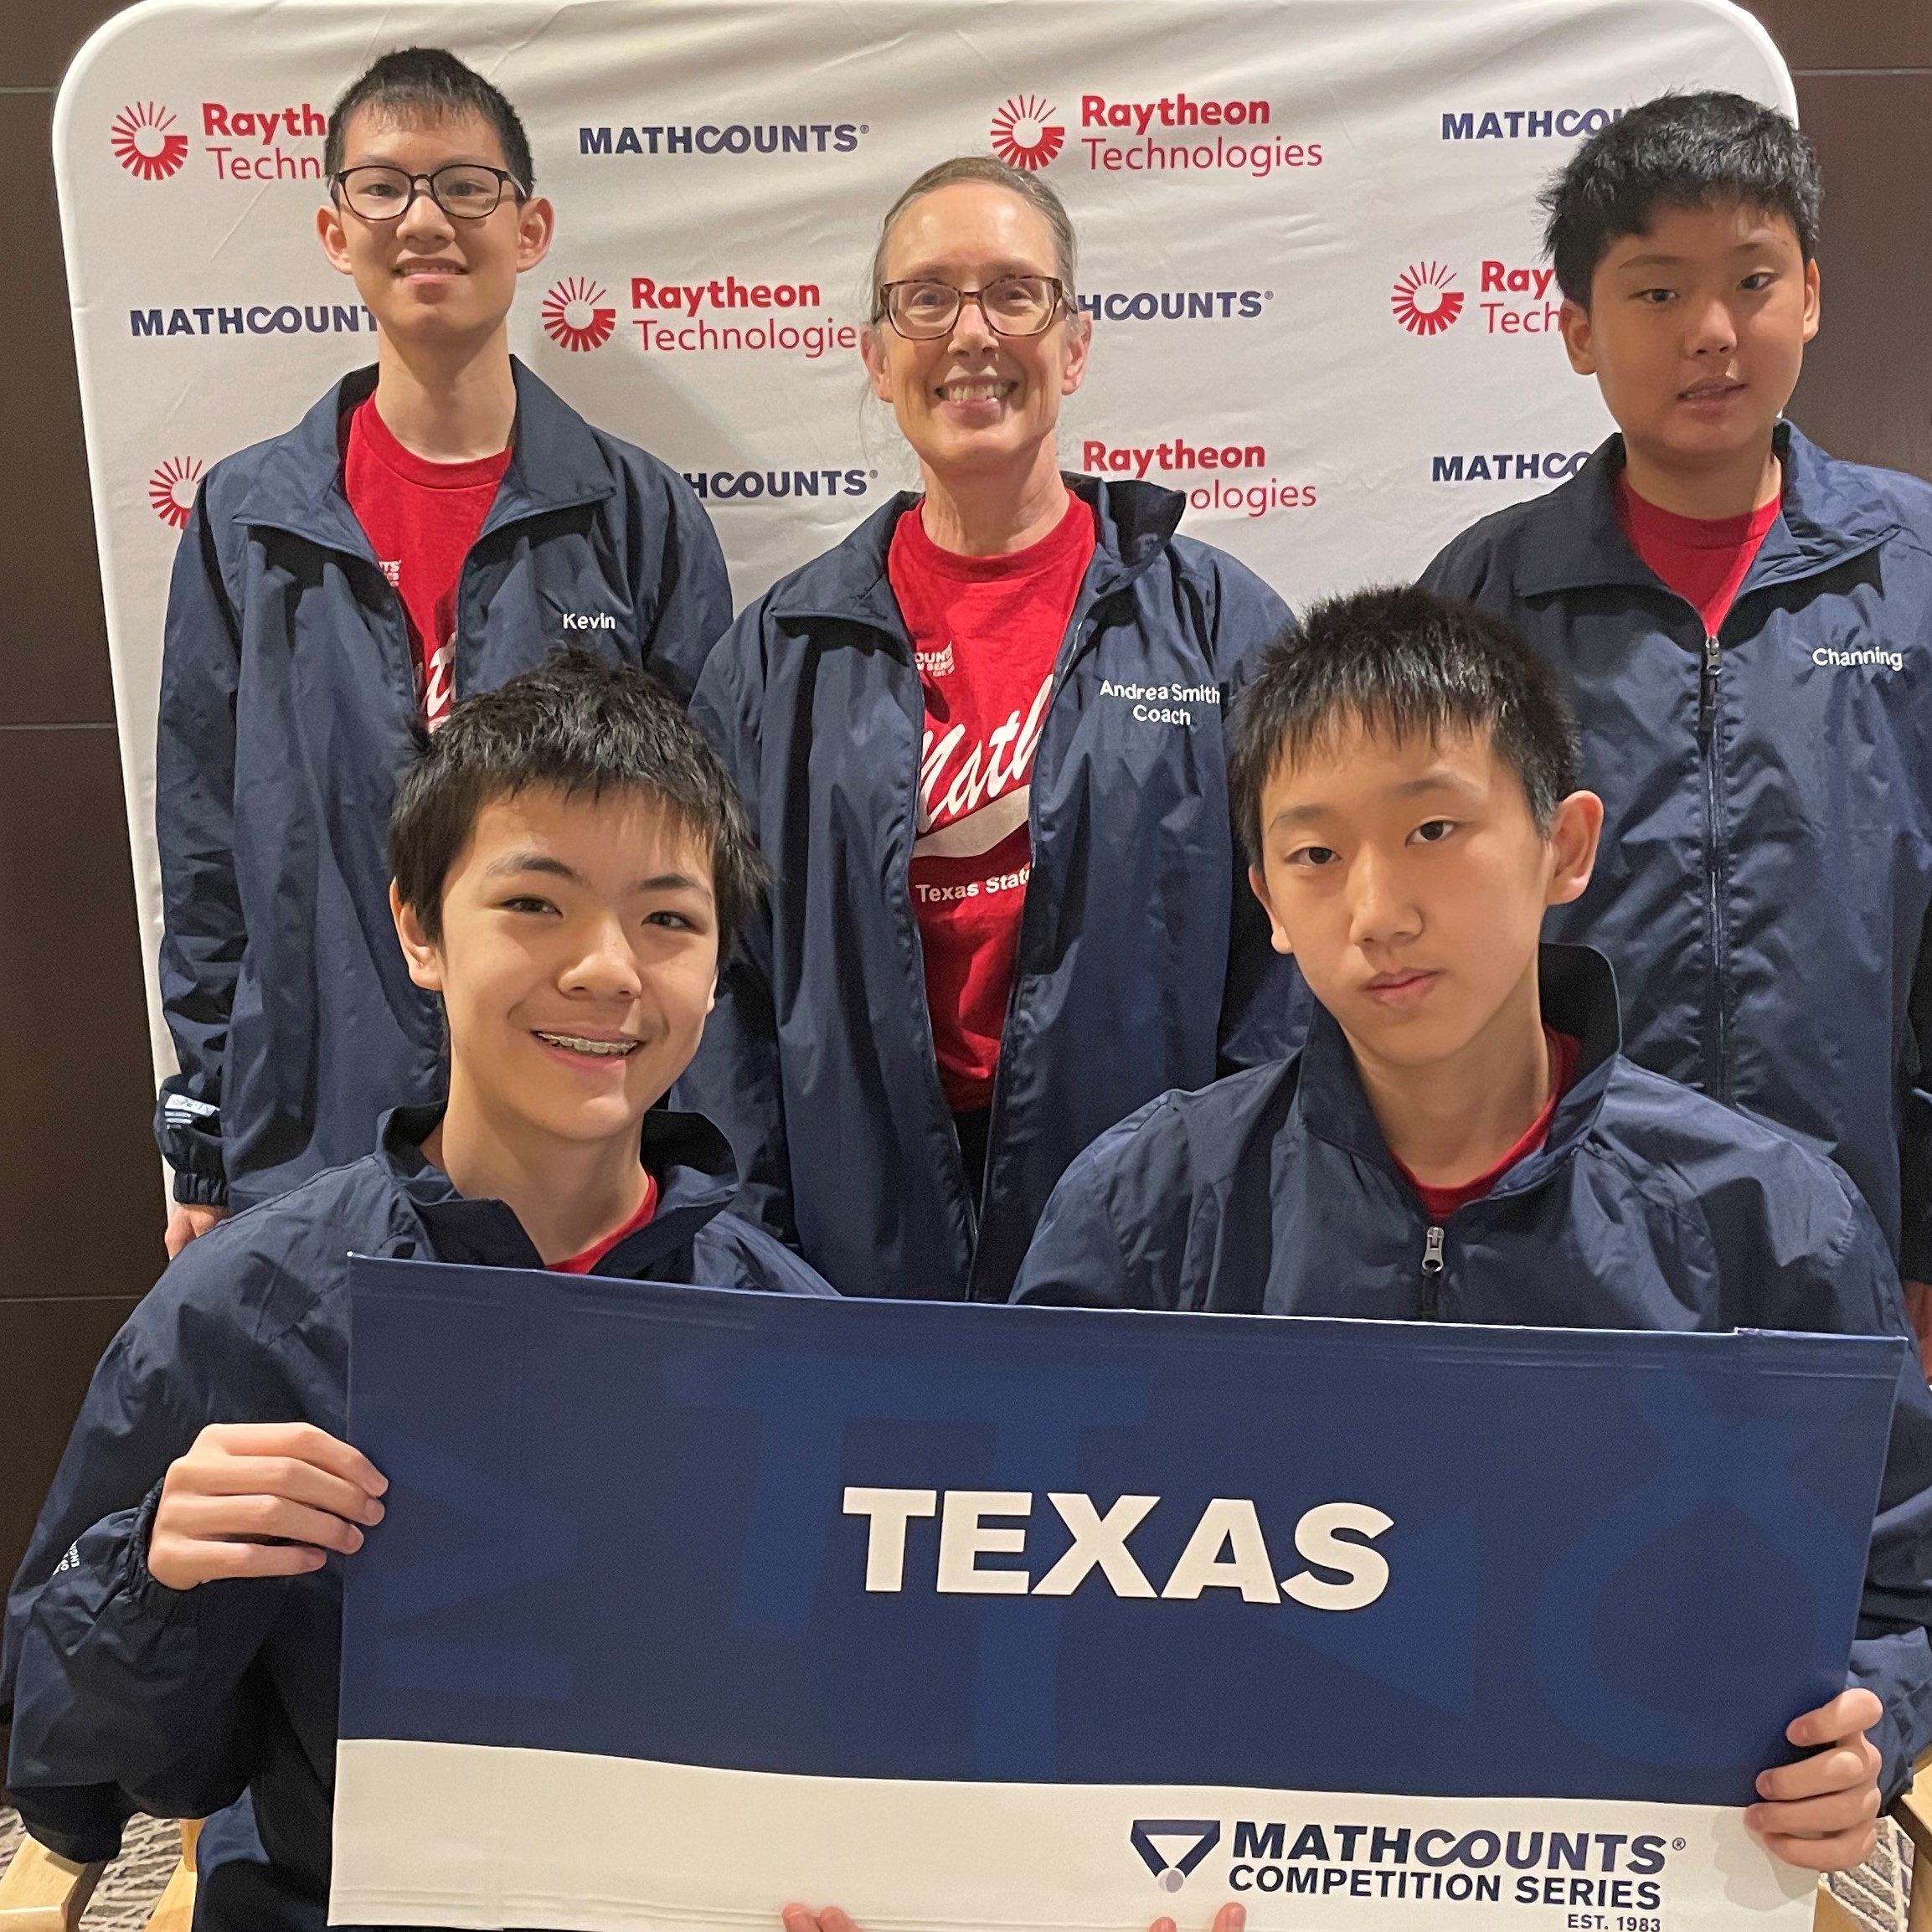 Texas (4 boys and coach) hold up Texas state sign in front of a MATHCOUNTS/Raytheon Technologies backdrop.